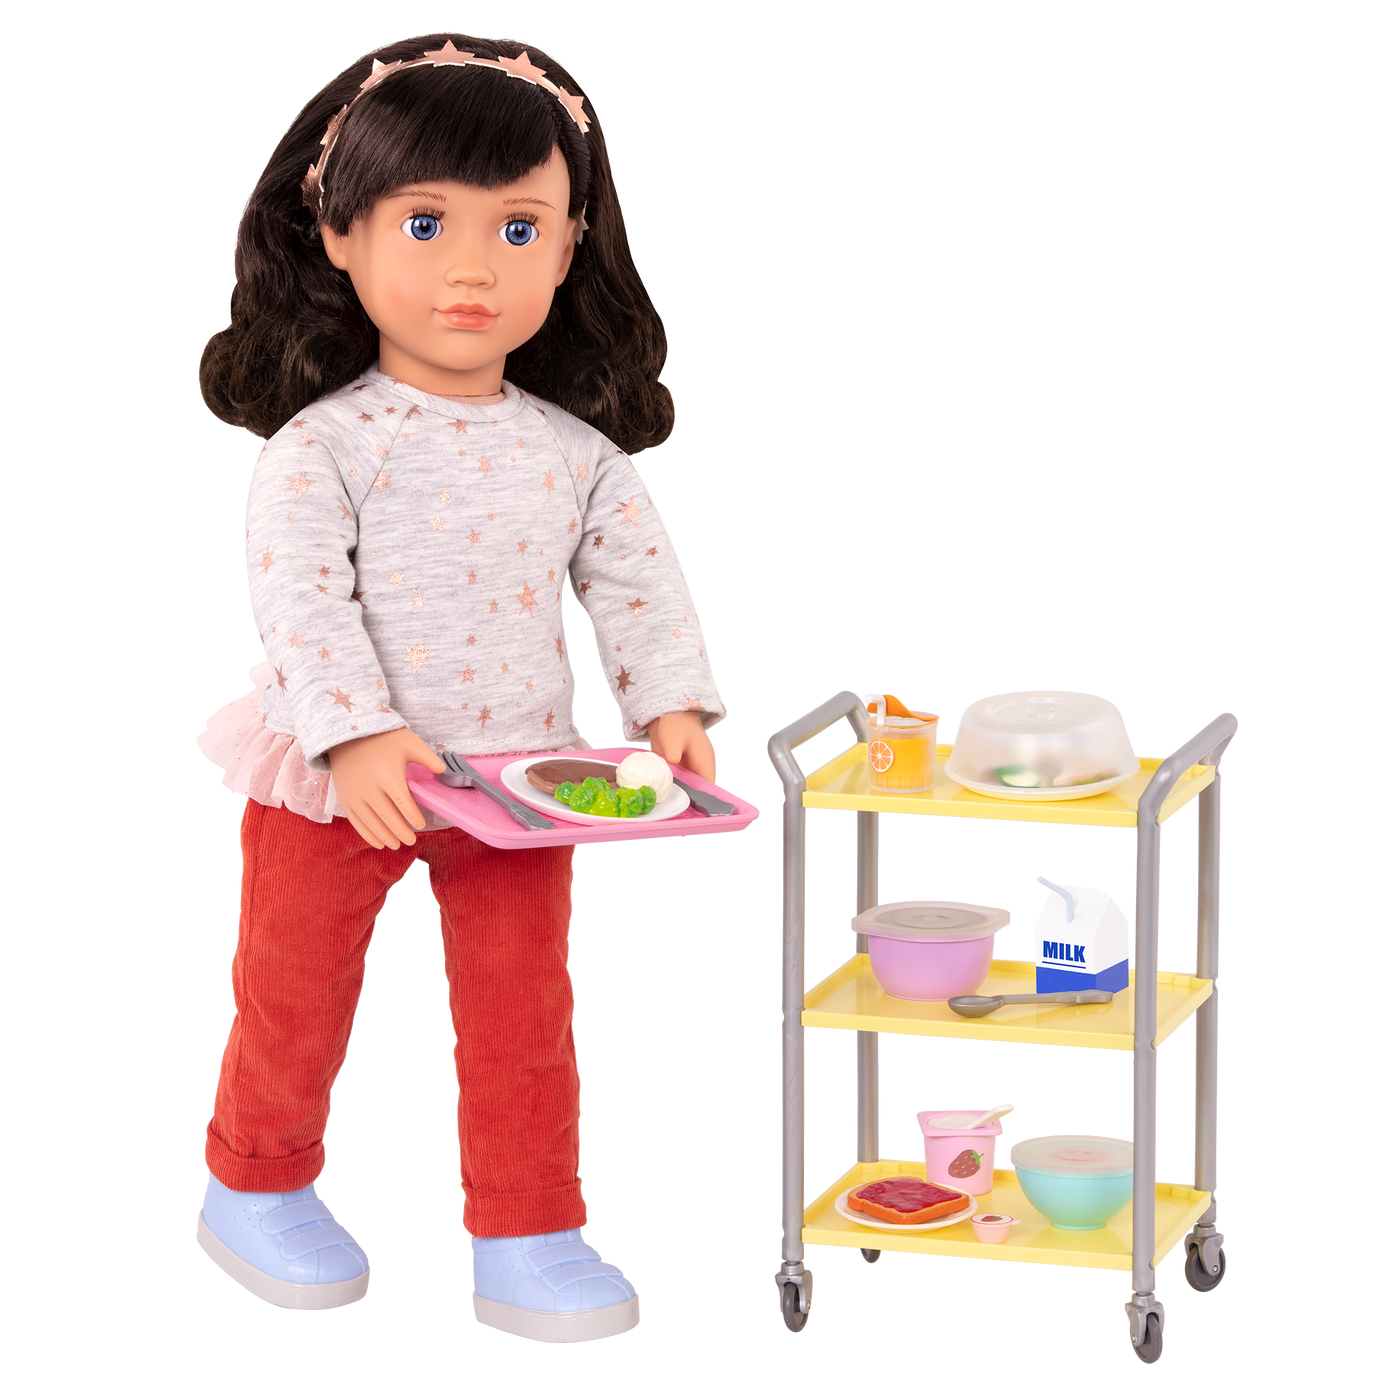 Hospital meal set on cart with 18-inch doll